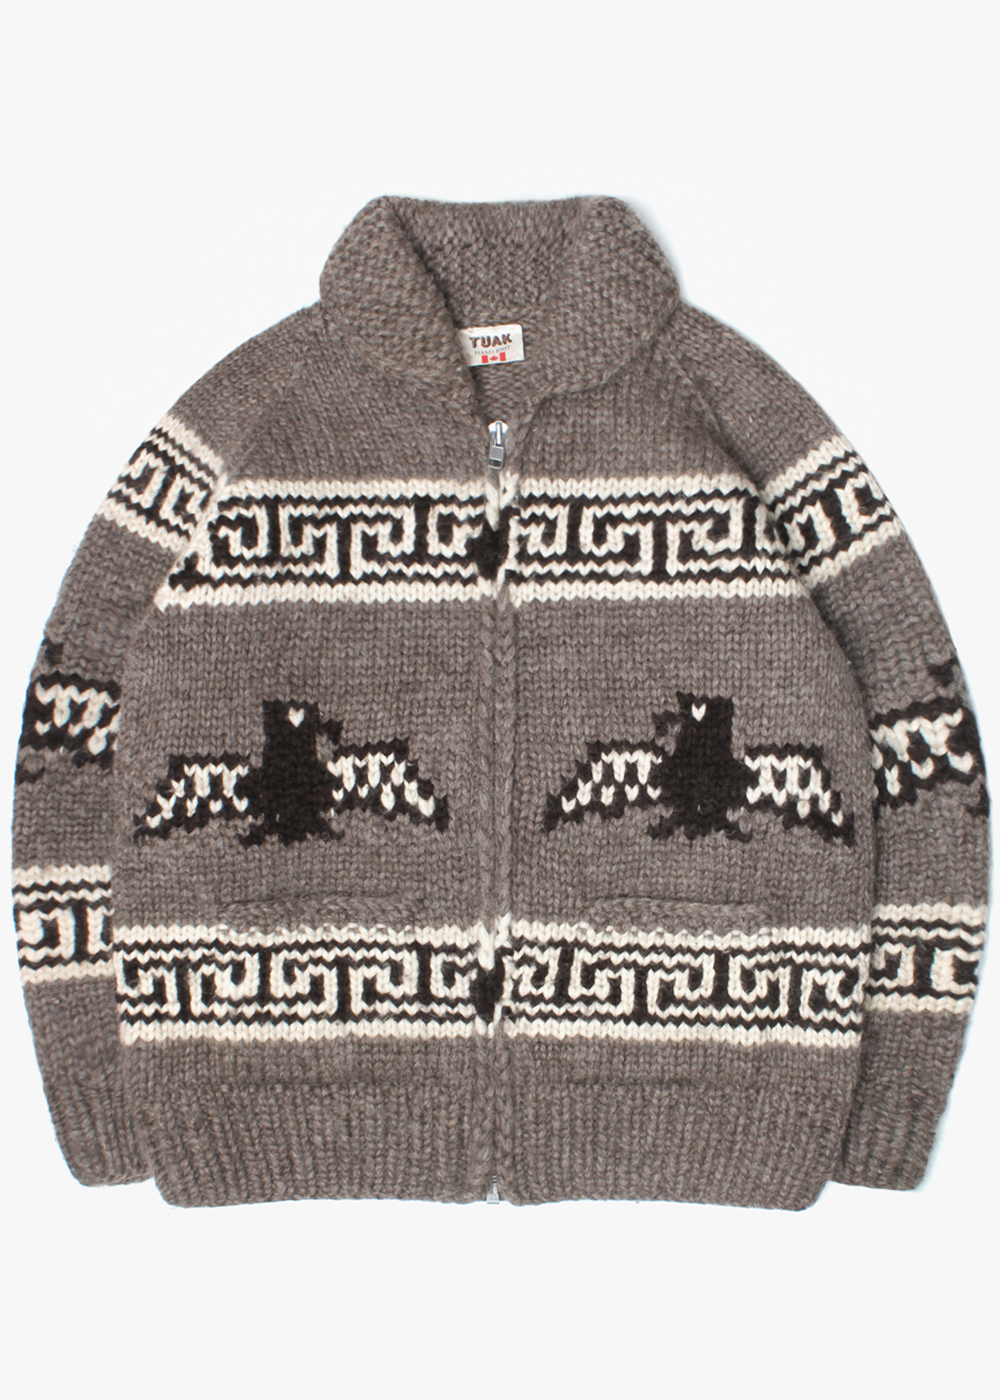 TUAK BY DOHNALEK ENTERPISES’over fit’cable heavy wool knit cowichan